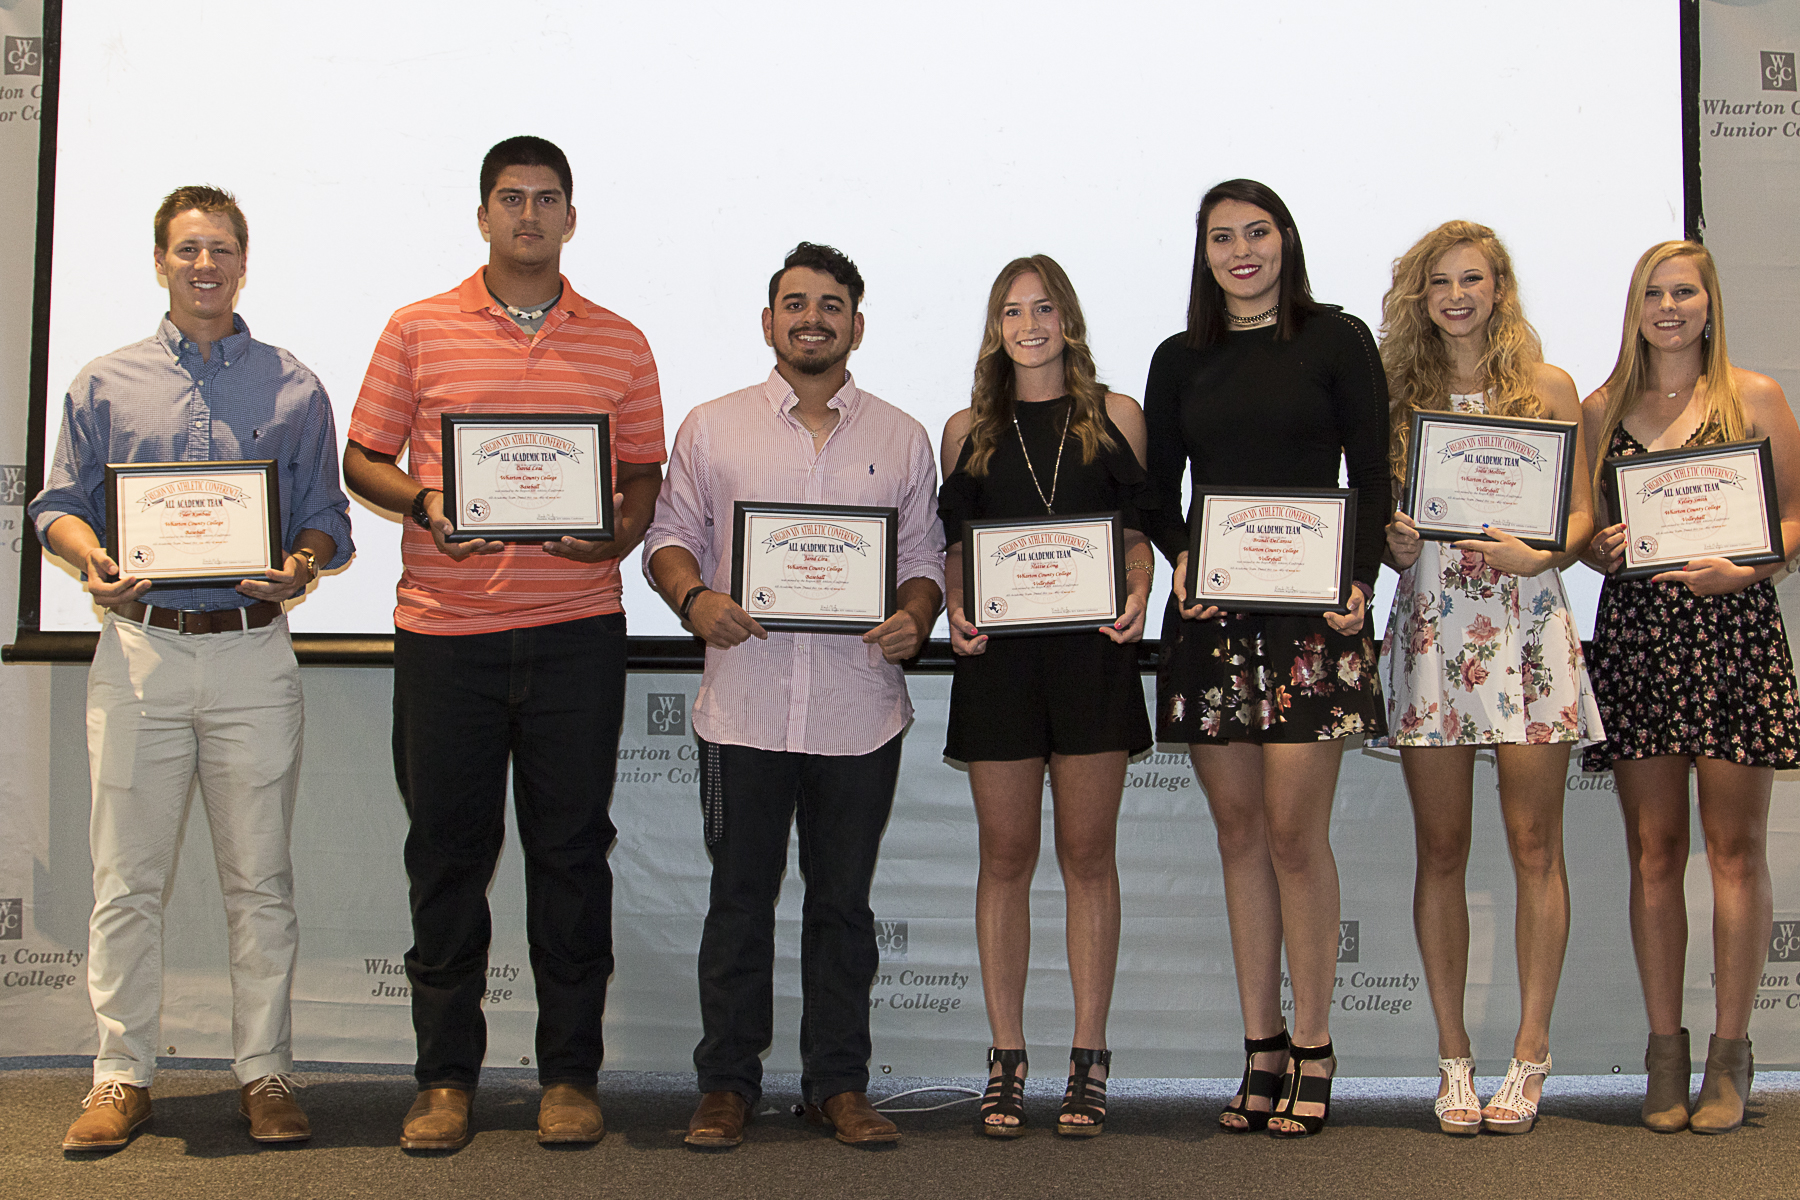 Wharton County Junior College student athletes were recognized for excellence both on and off the playing field at the 54th Annual Athletic Banquet,